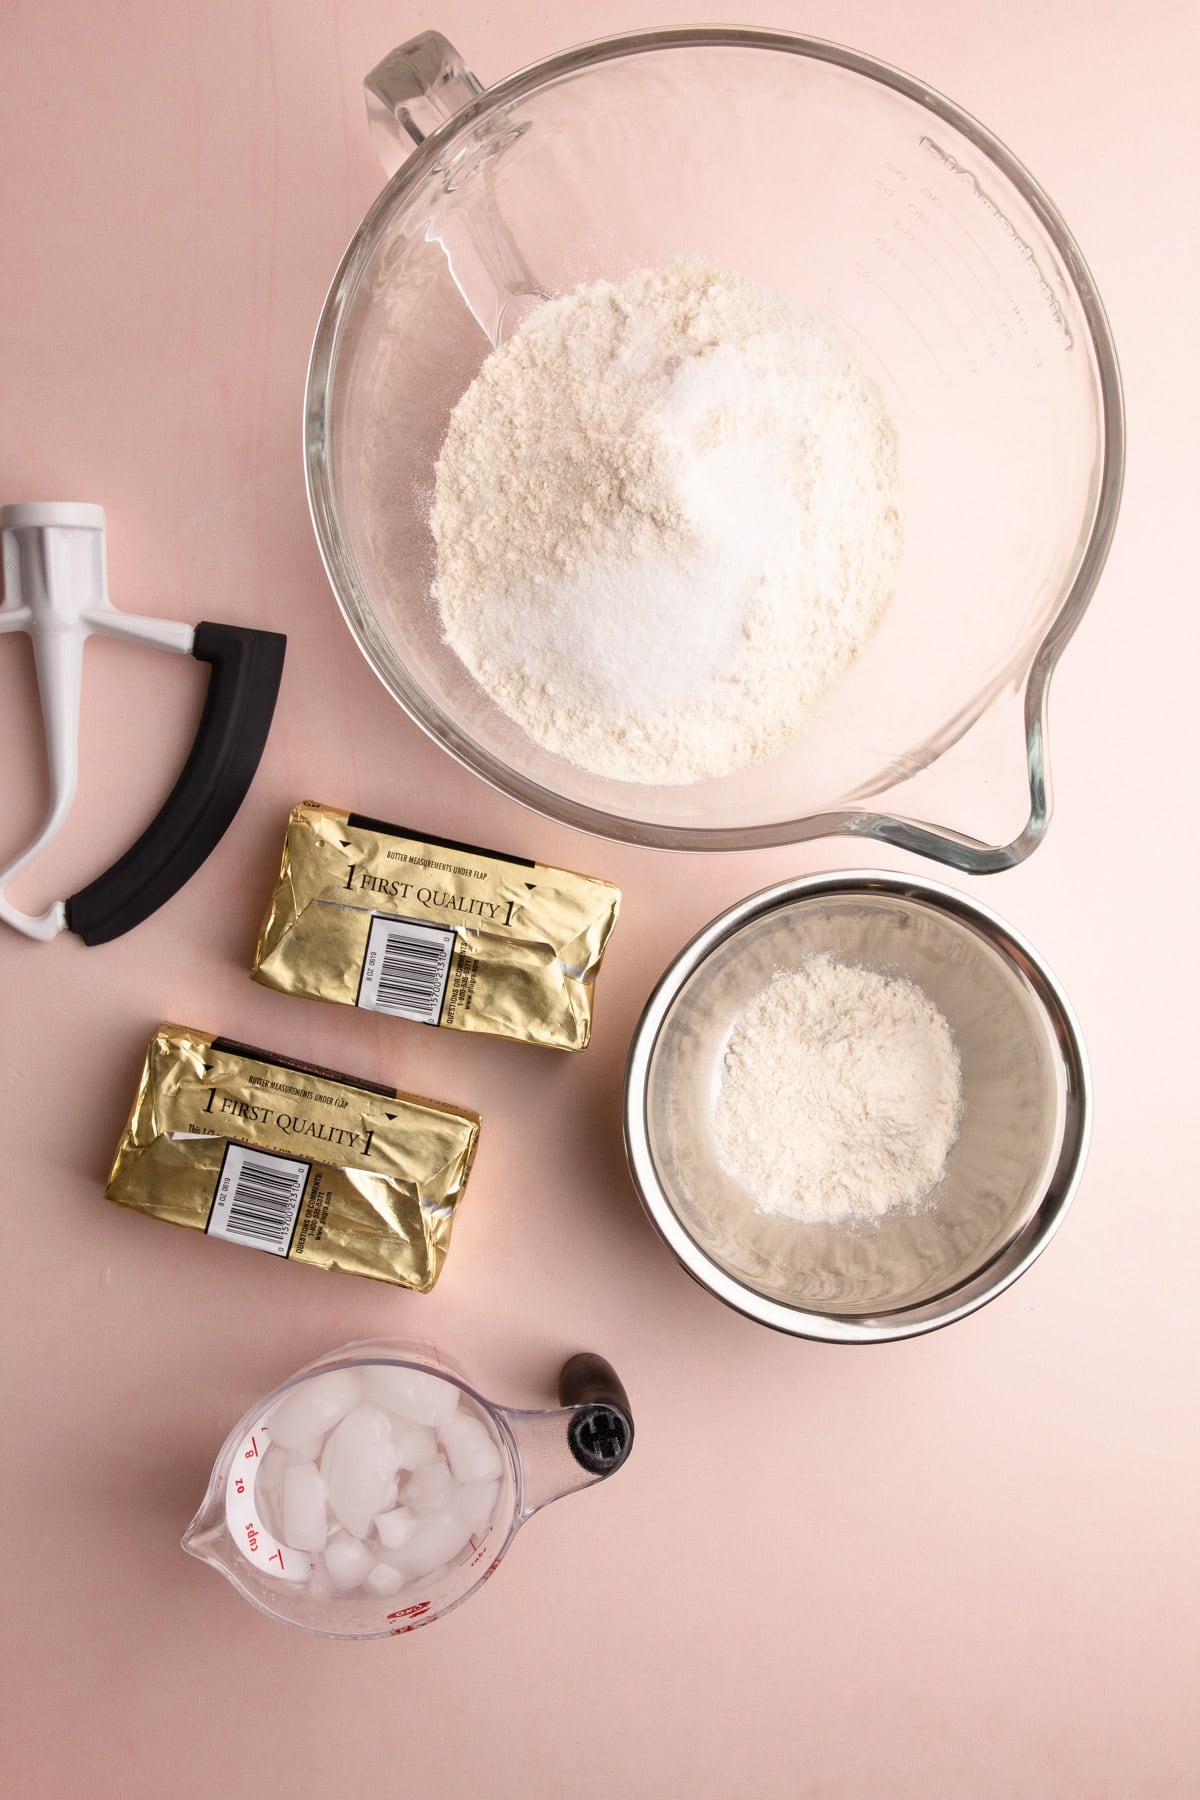 Ingredients for full puff pastry on a pink surface.